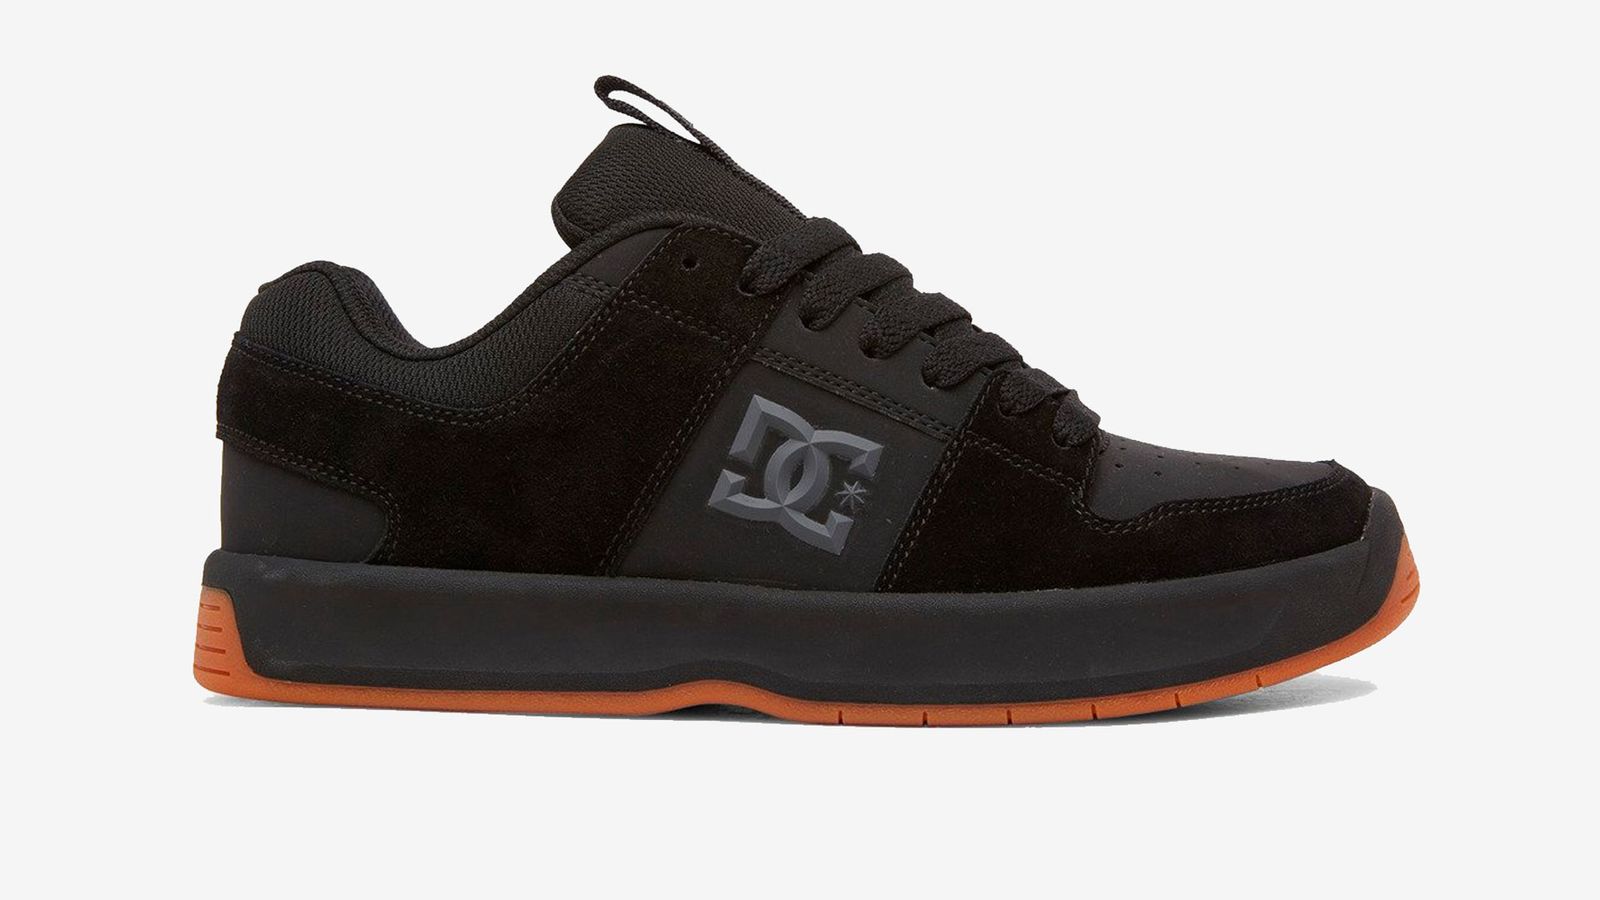 DC Lynx Zero product image of a black sneaker with gum sole and a grey DC logo on the side.